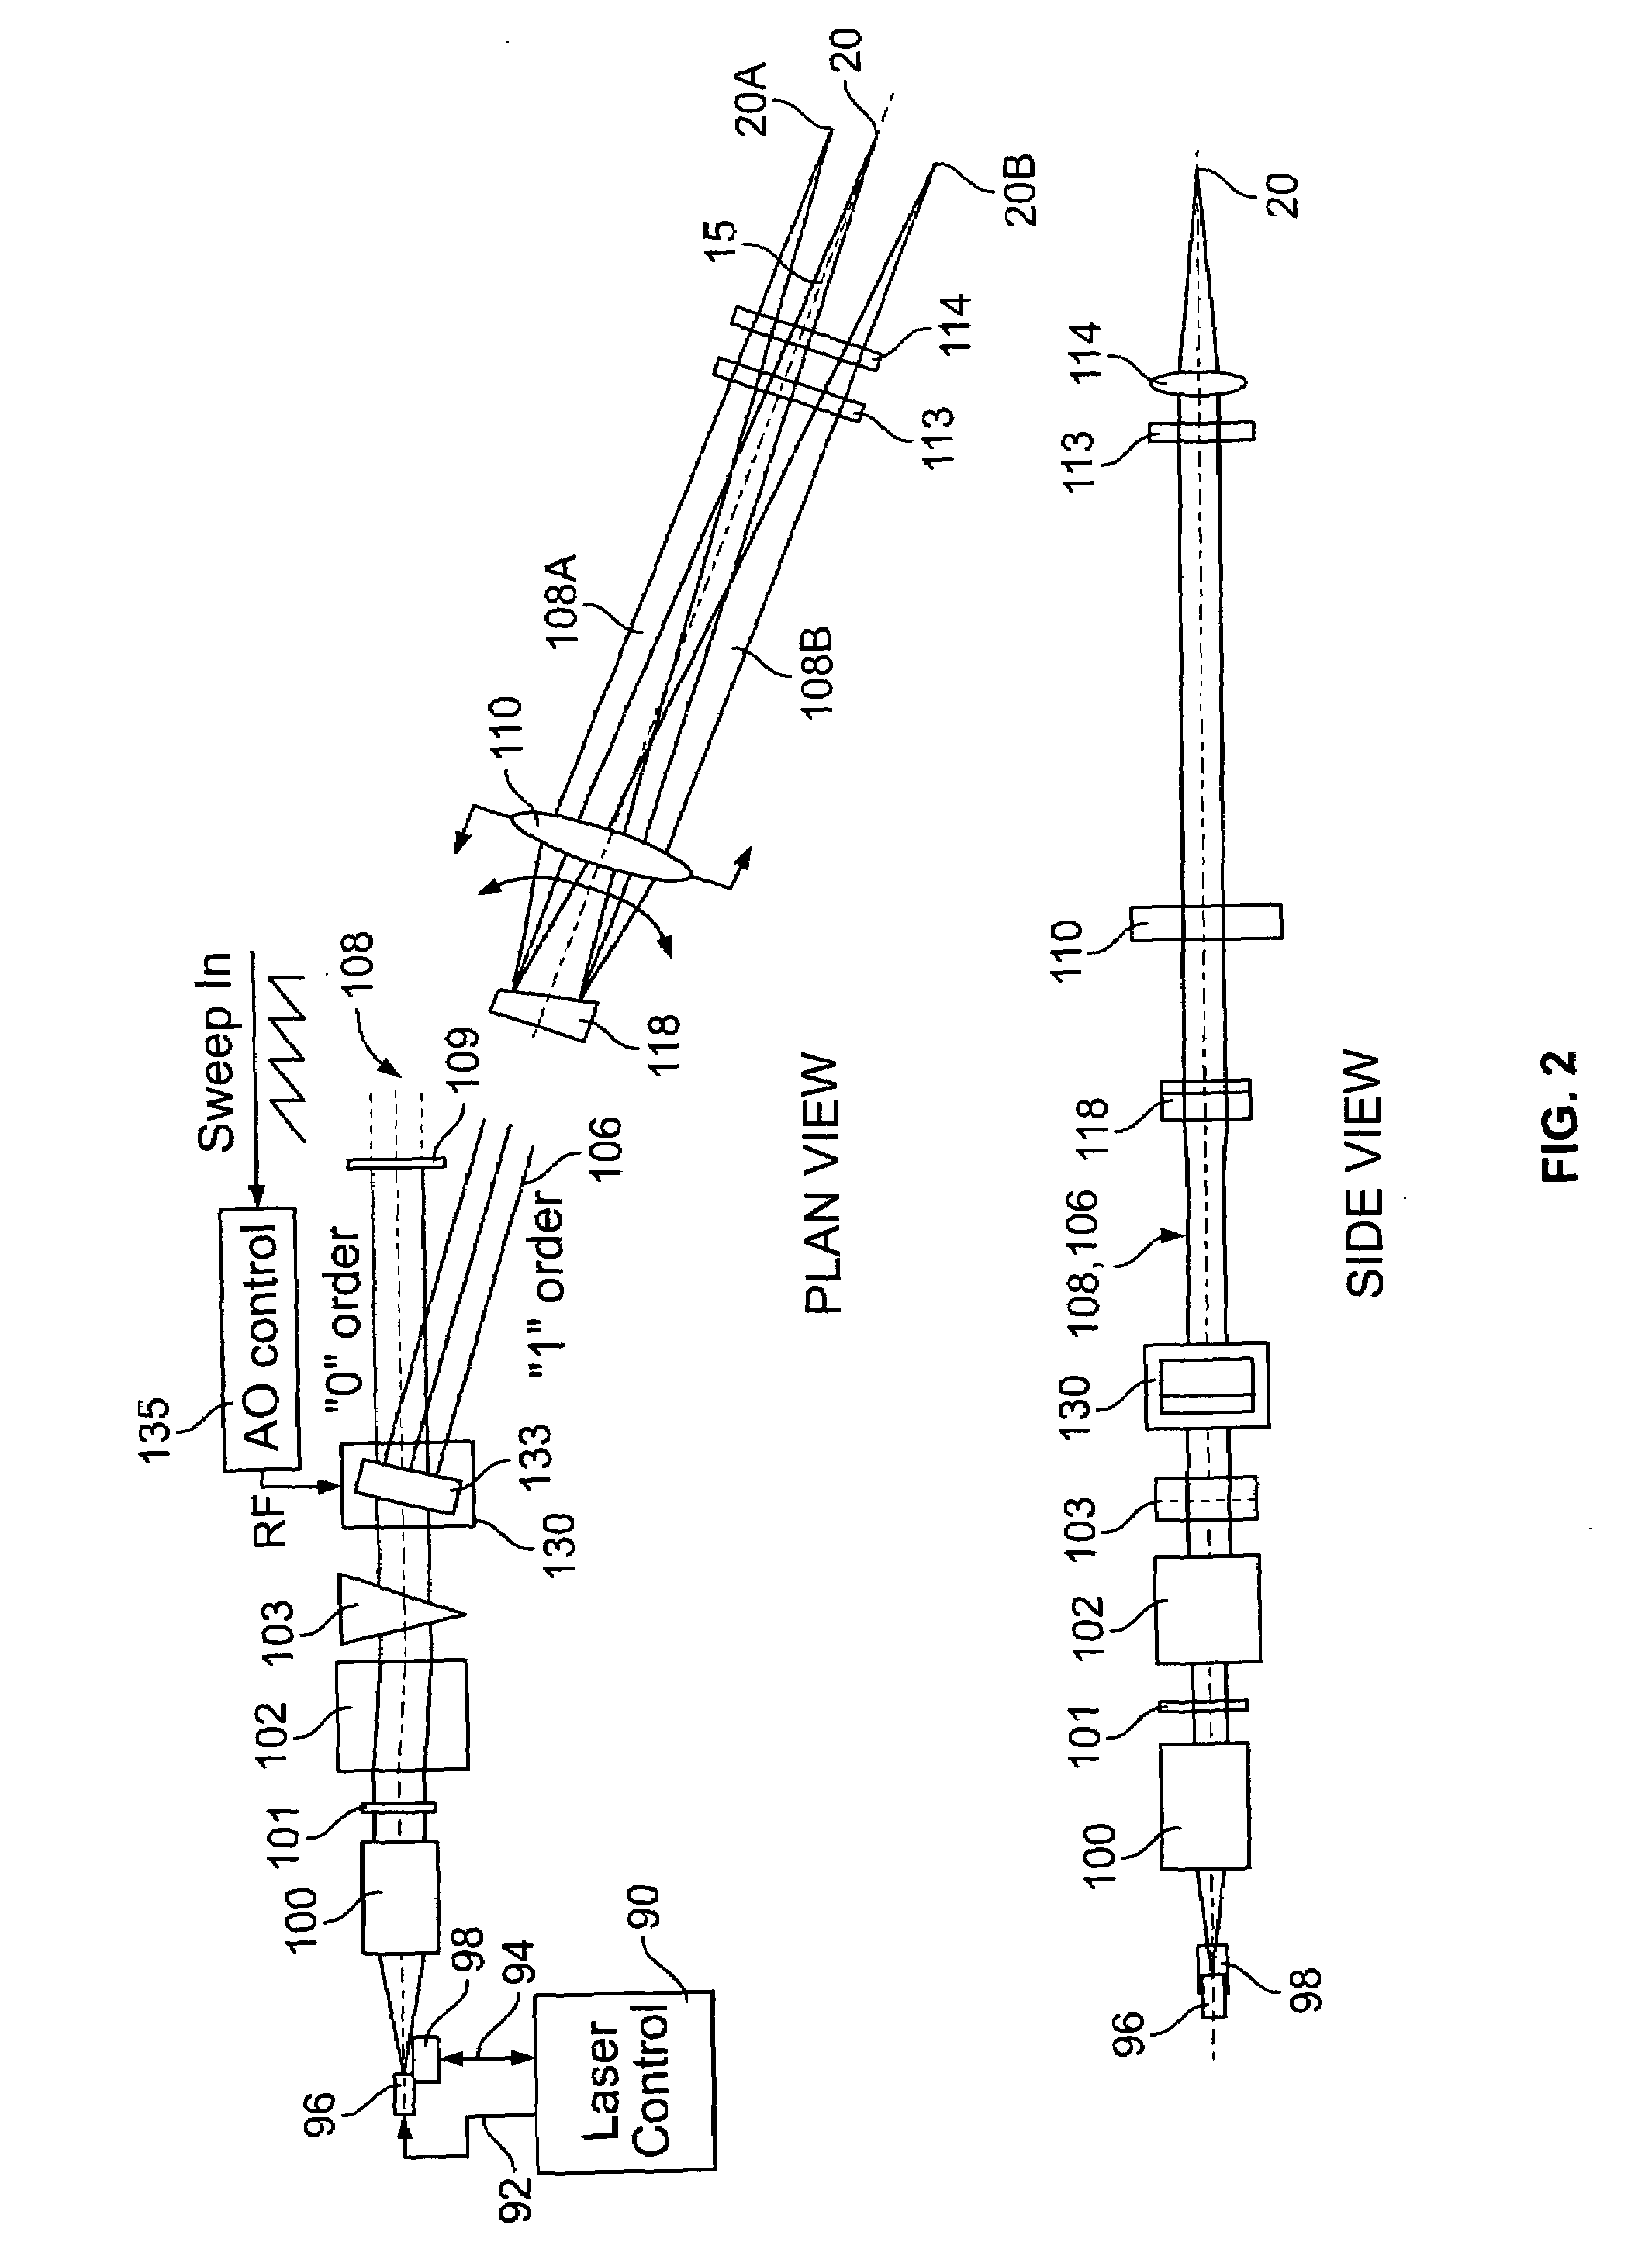 Method and system for providing a high definition triangulation system